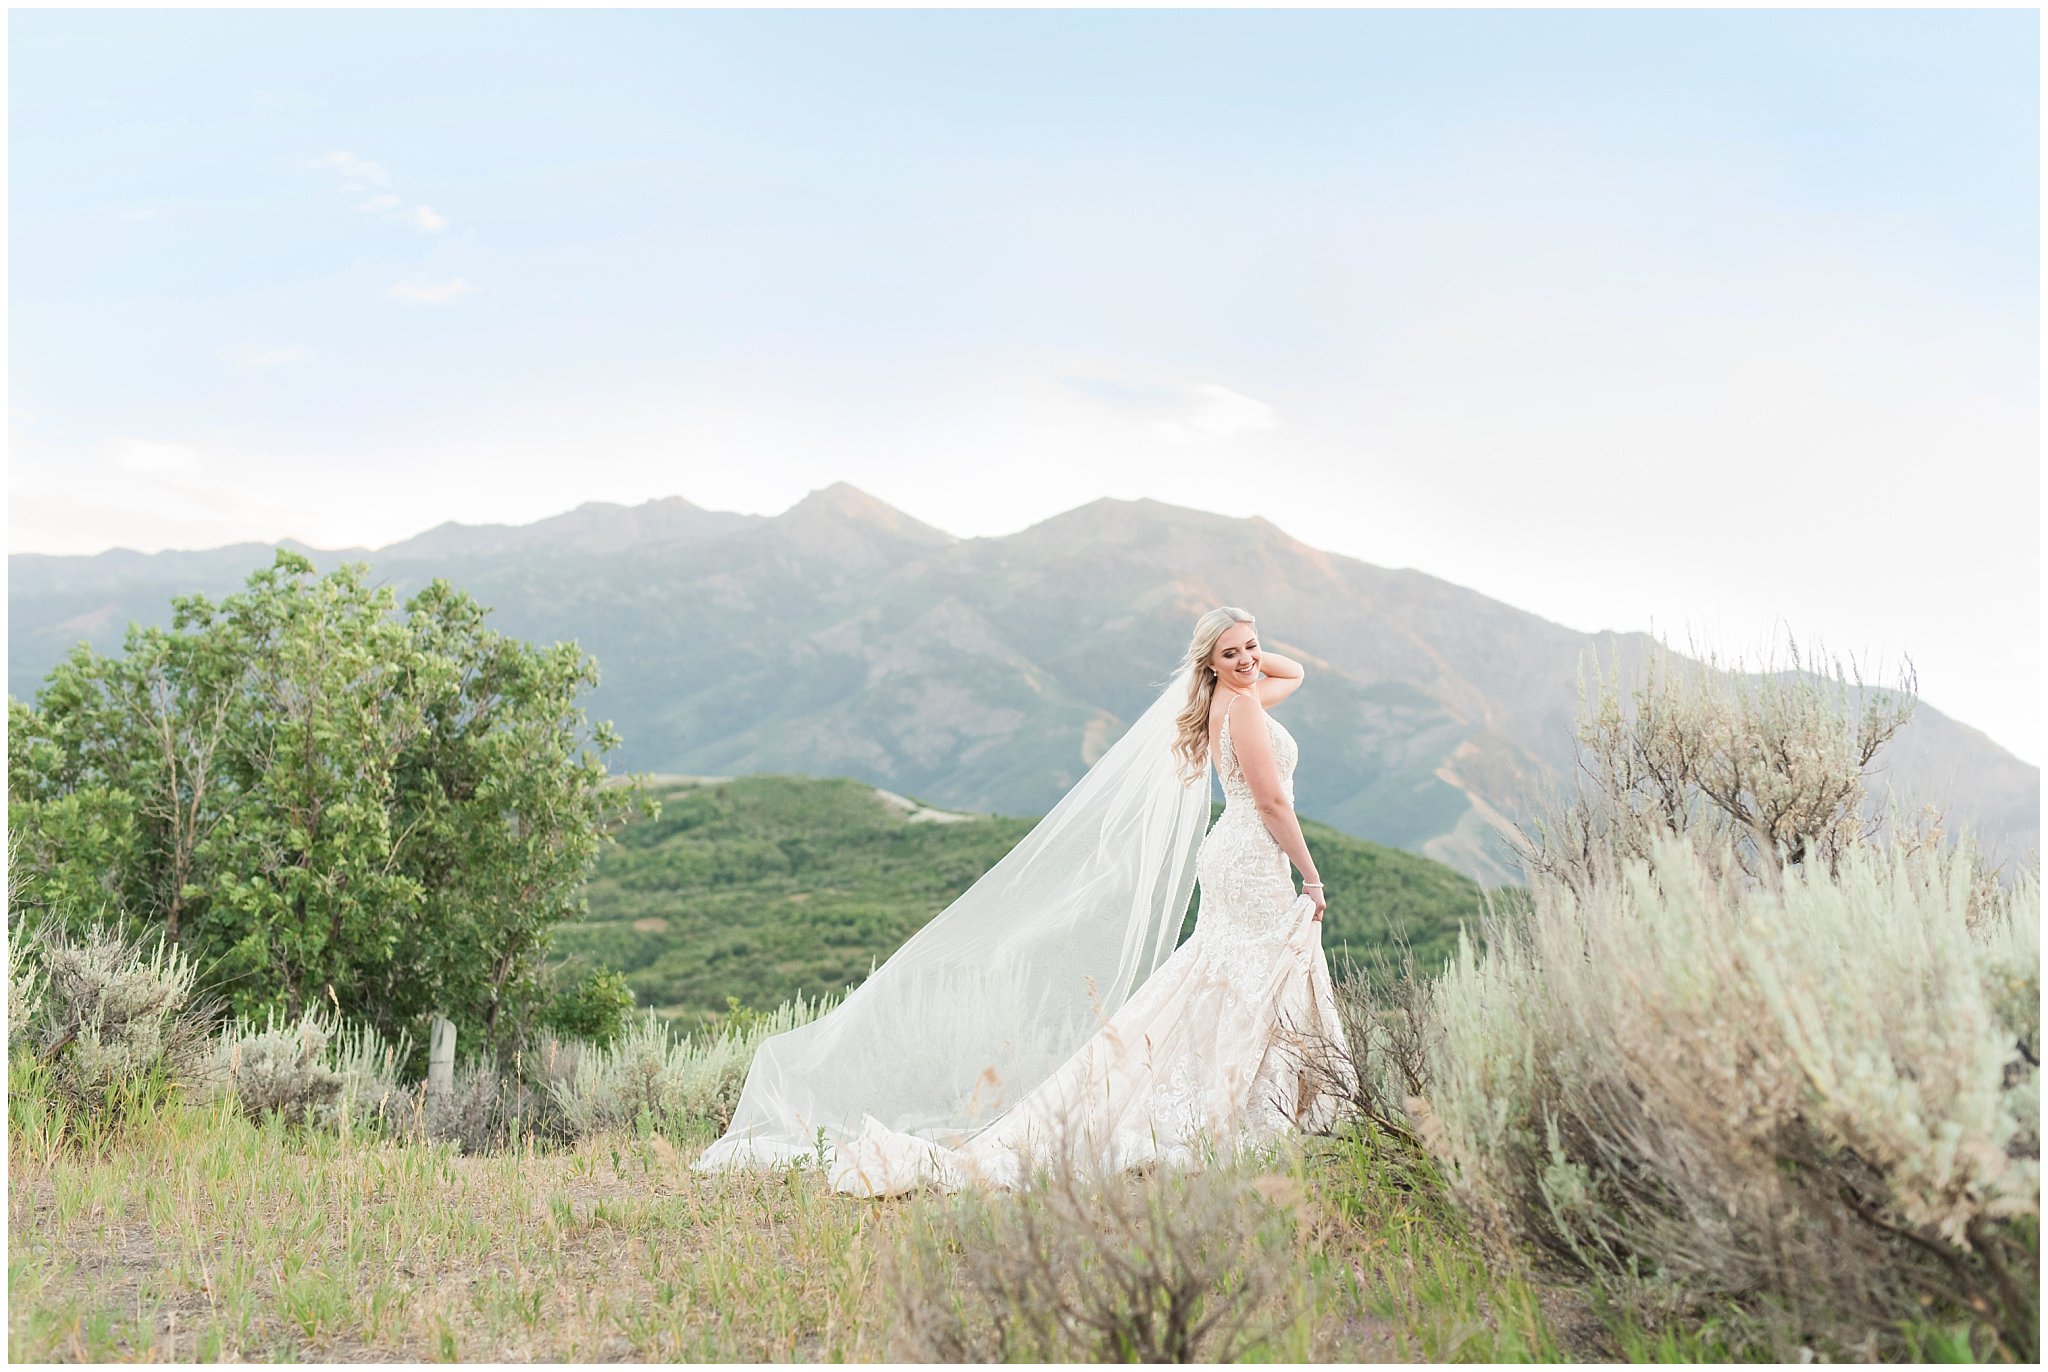 Bride with lace detail dress and long flowing veil | Snowbasin Summer Bridal Session | Jessie and Dallin Photography